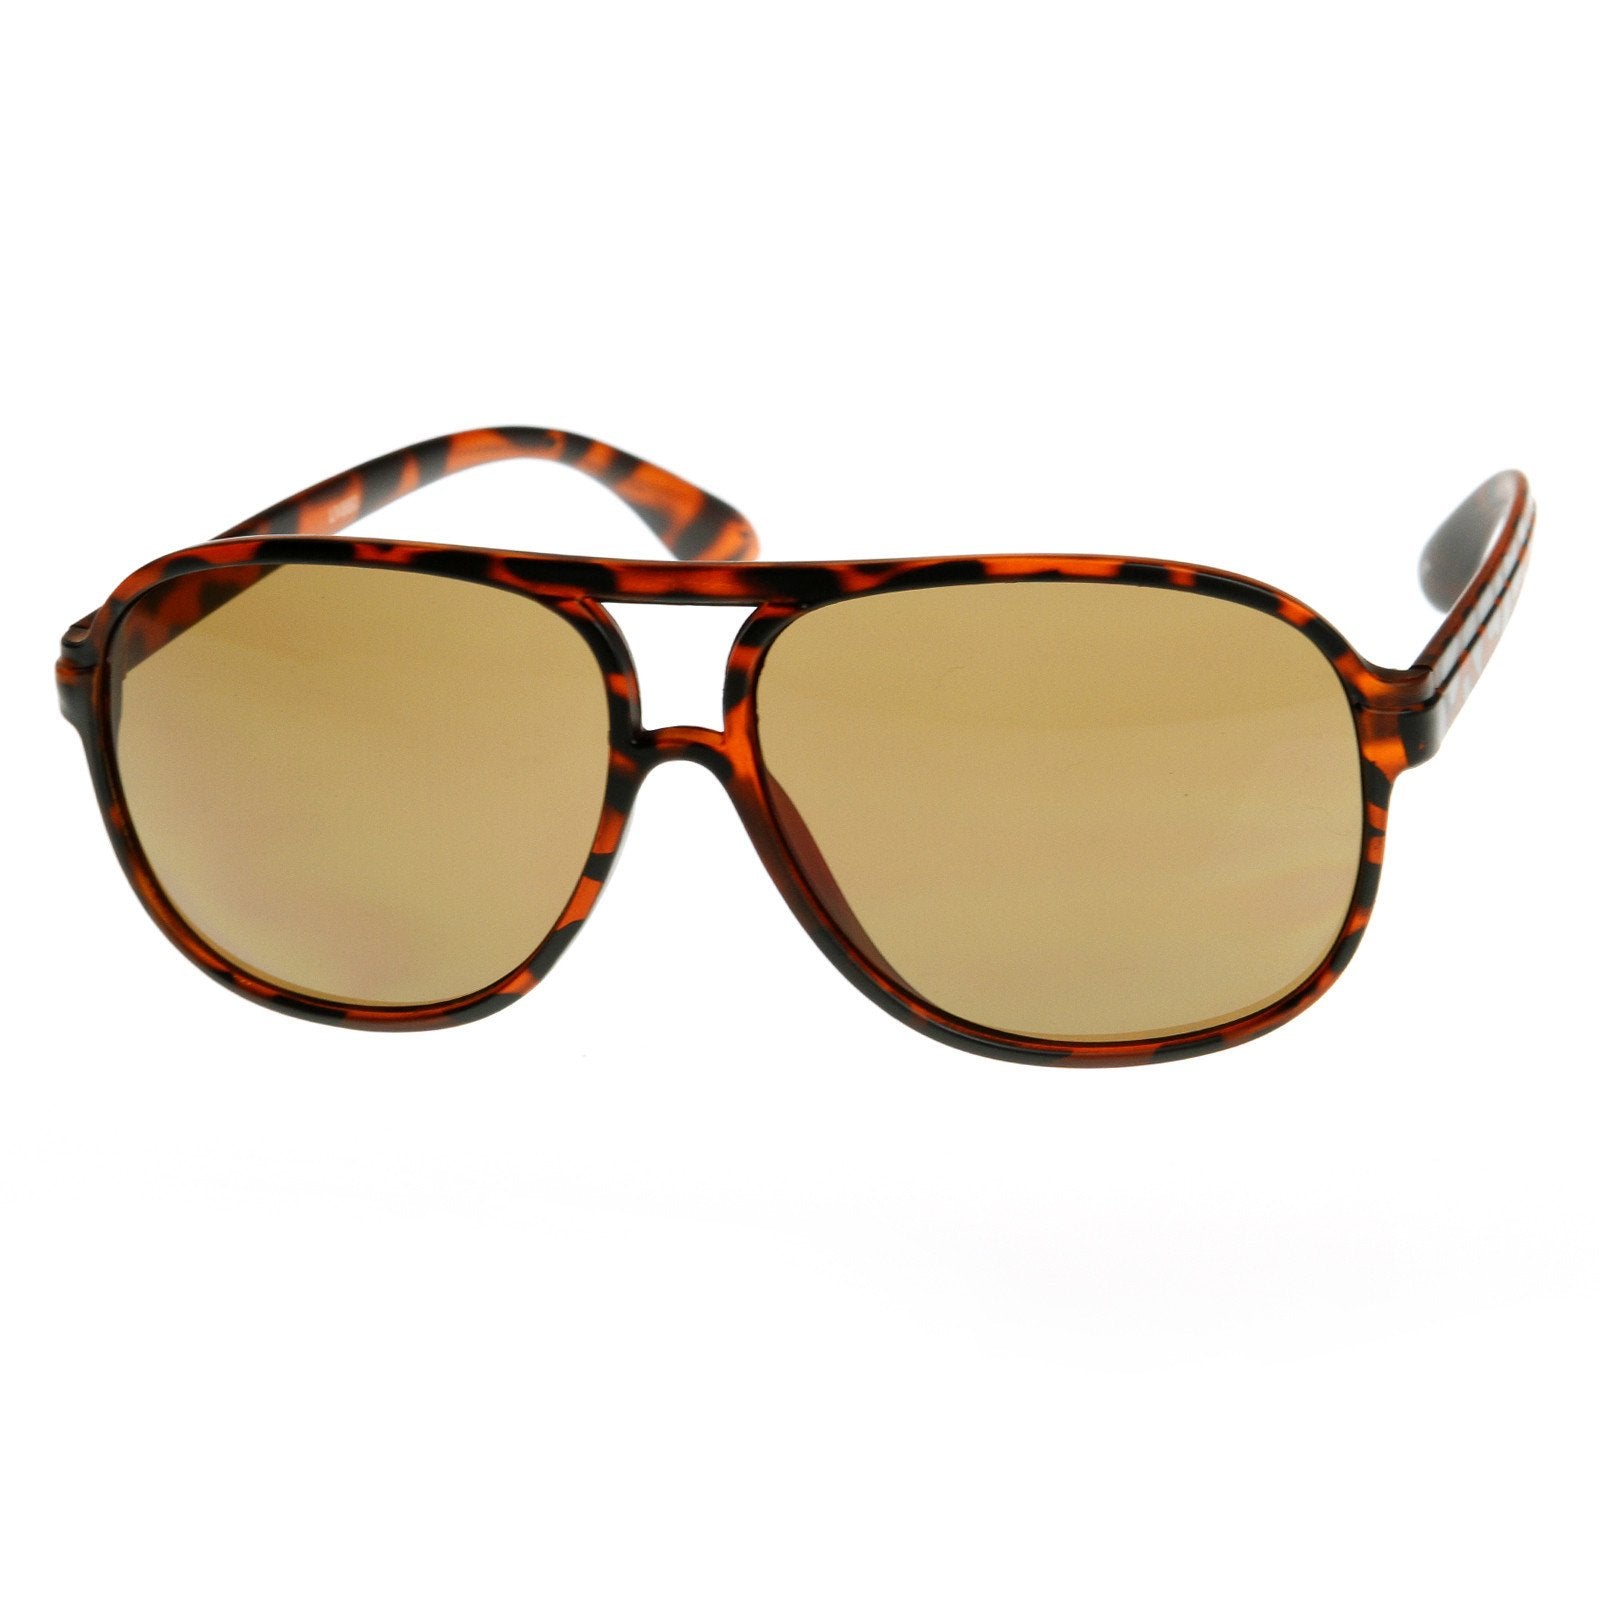 Hipster Square Mirrored Sunglasses